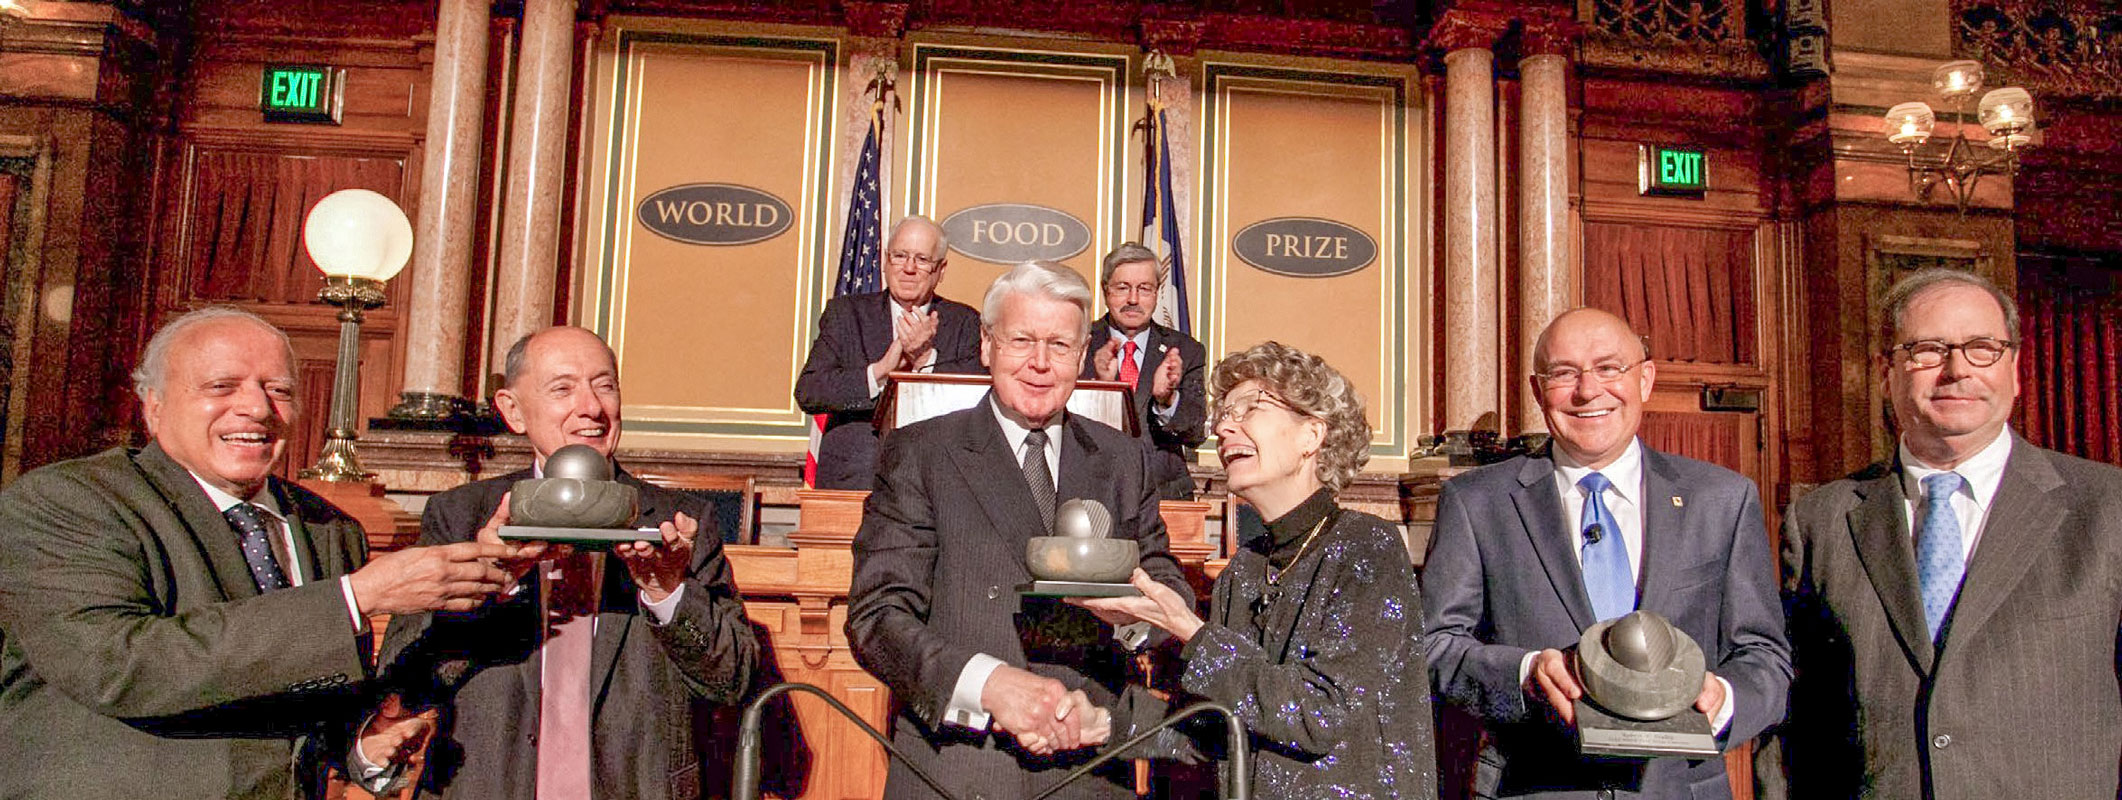 World Food Prize recipient Dr Swaminathan (L) at the 2013 Laureate Award Ceremony held at the Iowa State Capitol in Des Moines.